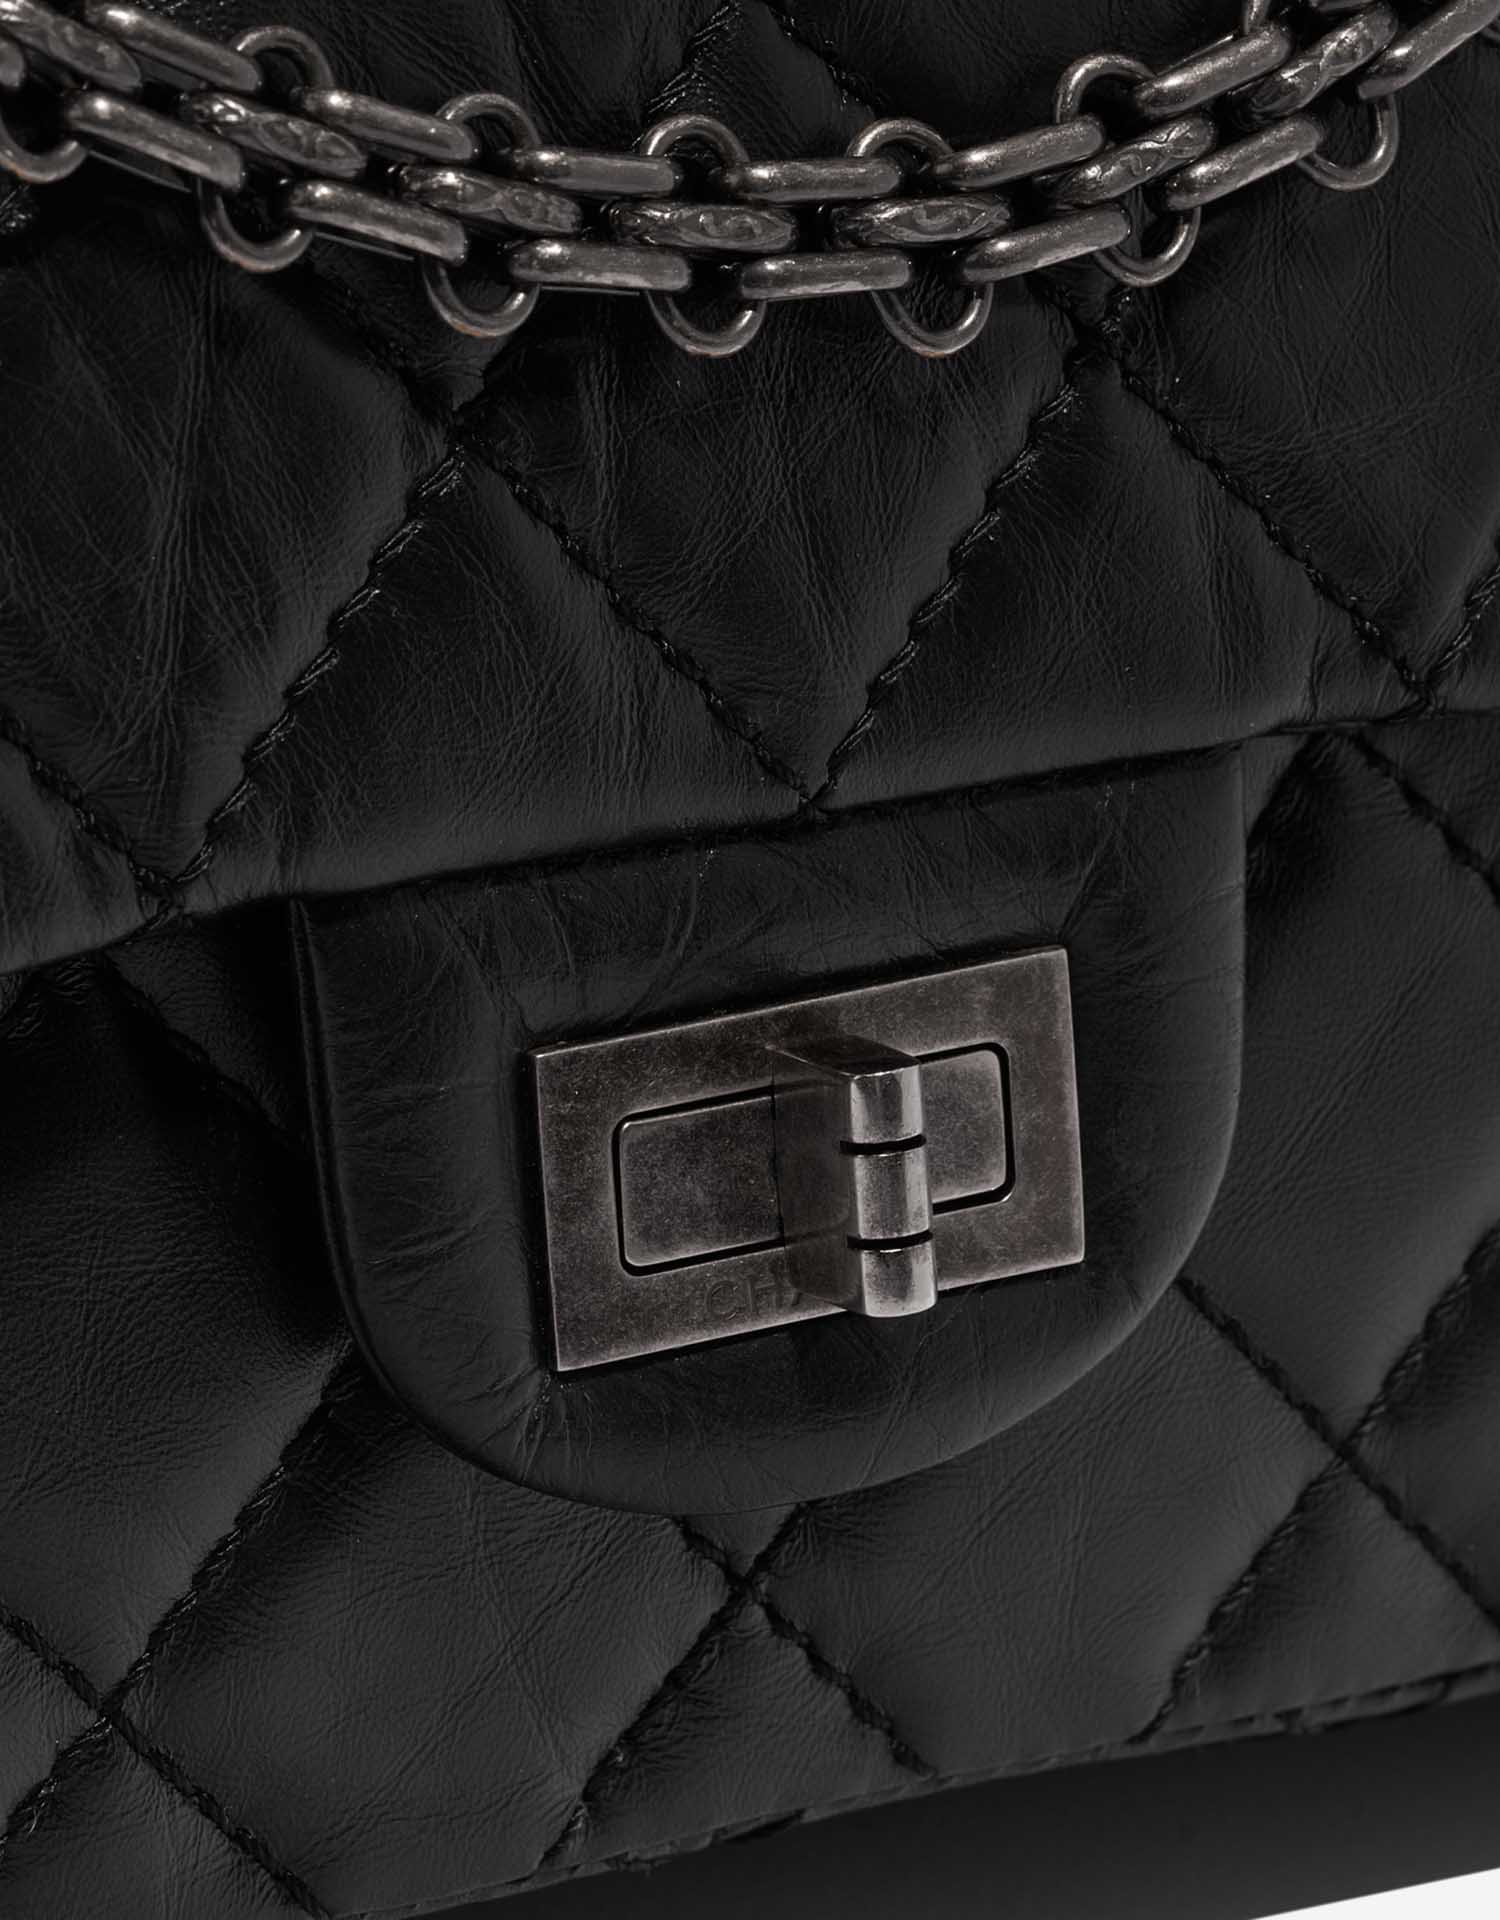 Chanel Reissue 2.55 Flap Bag Quilted Aged Calfskin 226 Blue